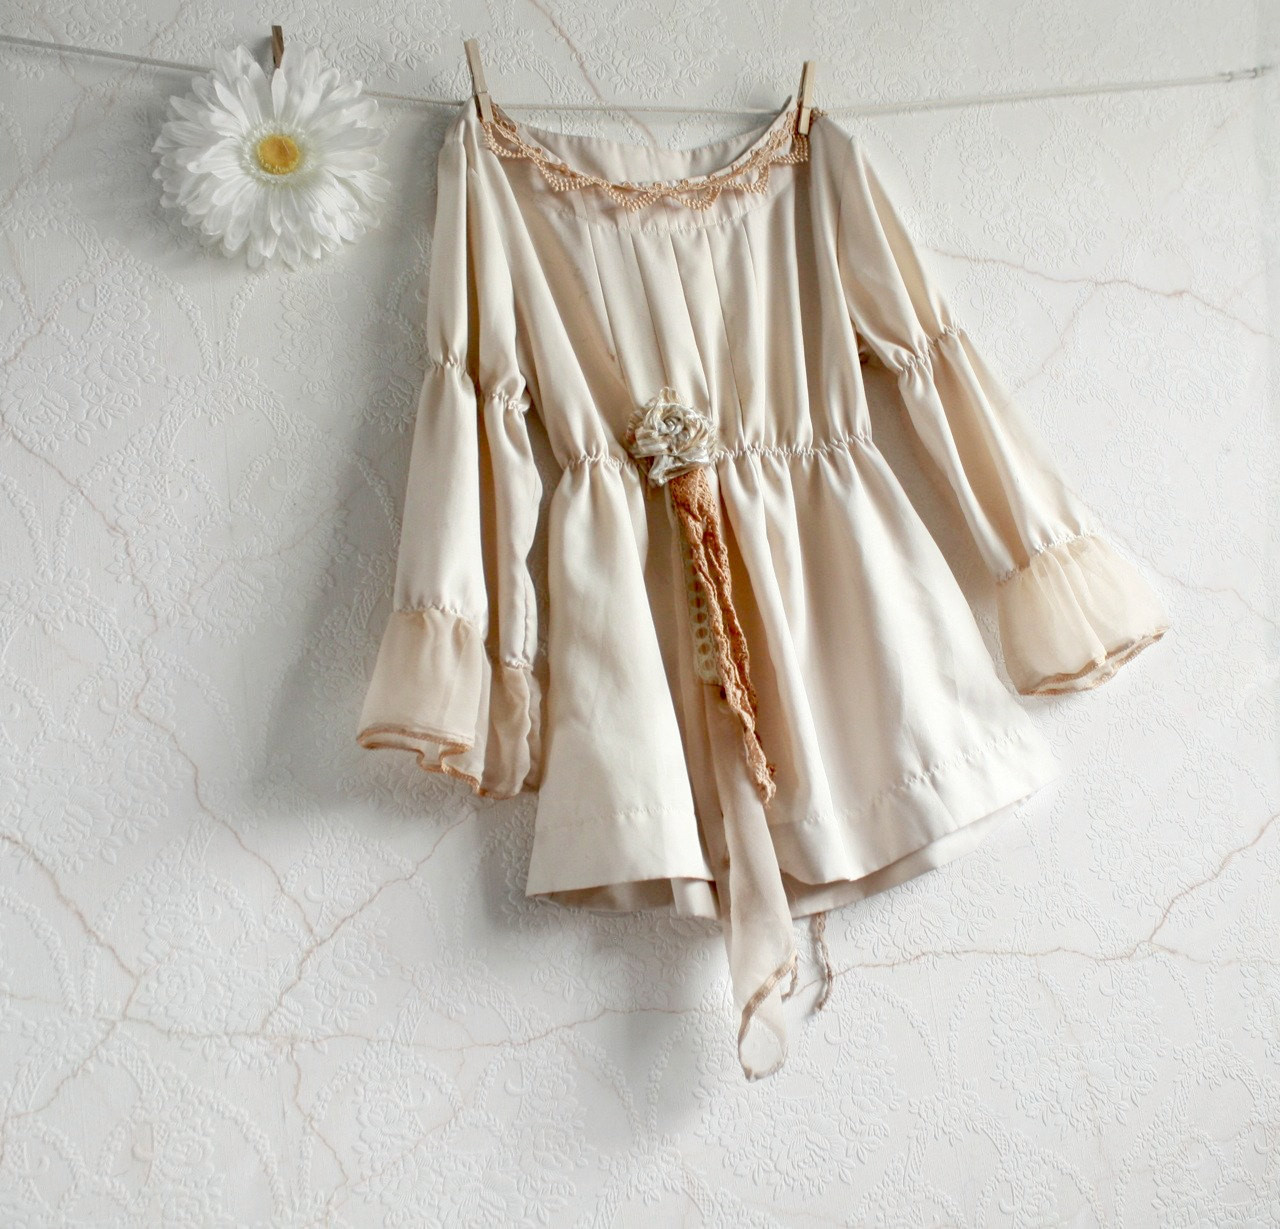 Best ideas about Shabby Chic Clothing
. Save or Pin Cream Blouse Shabby Chic Clothing Women s by Now.